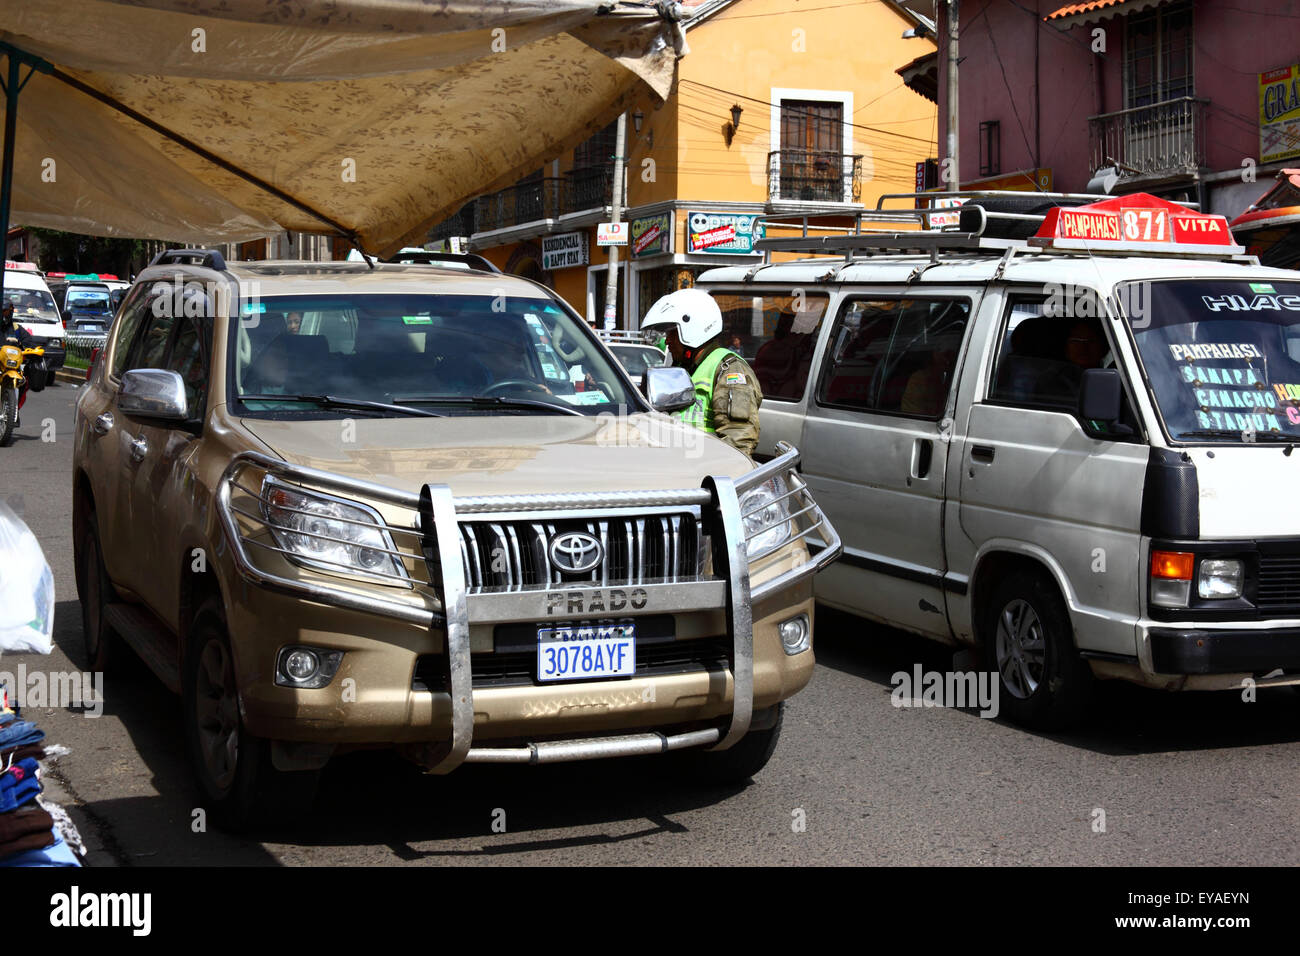 Traffic policeman speaks to driver who had been parked illegally, La Paz, Bolivia Stock Photo